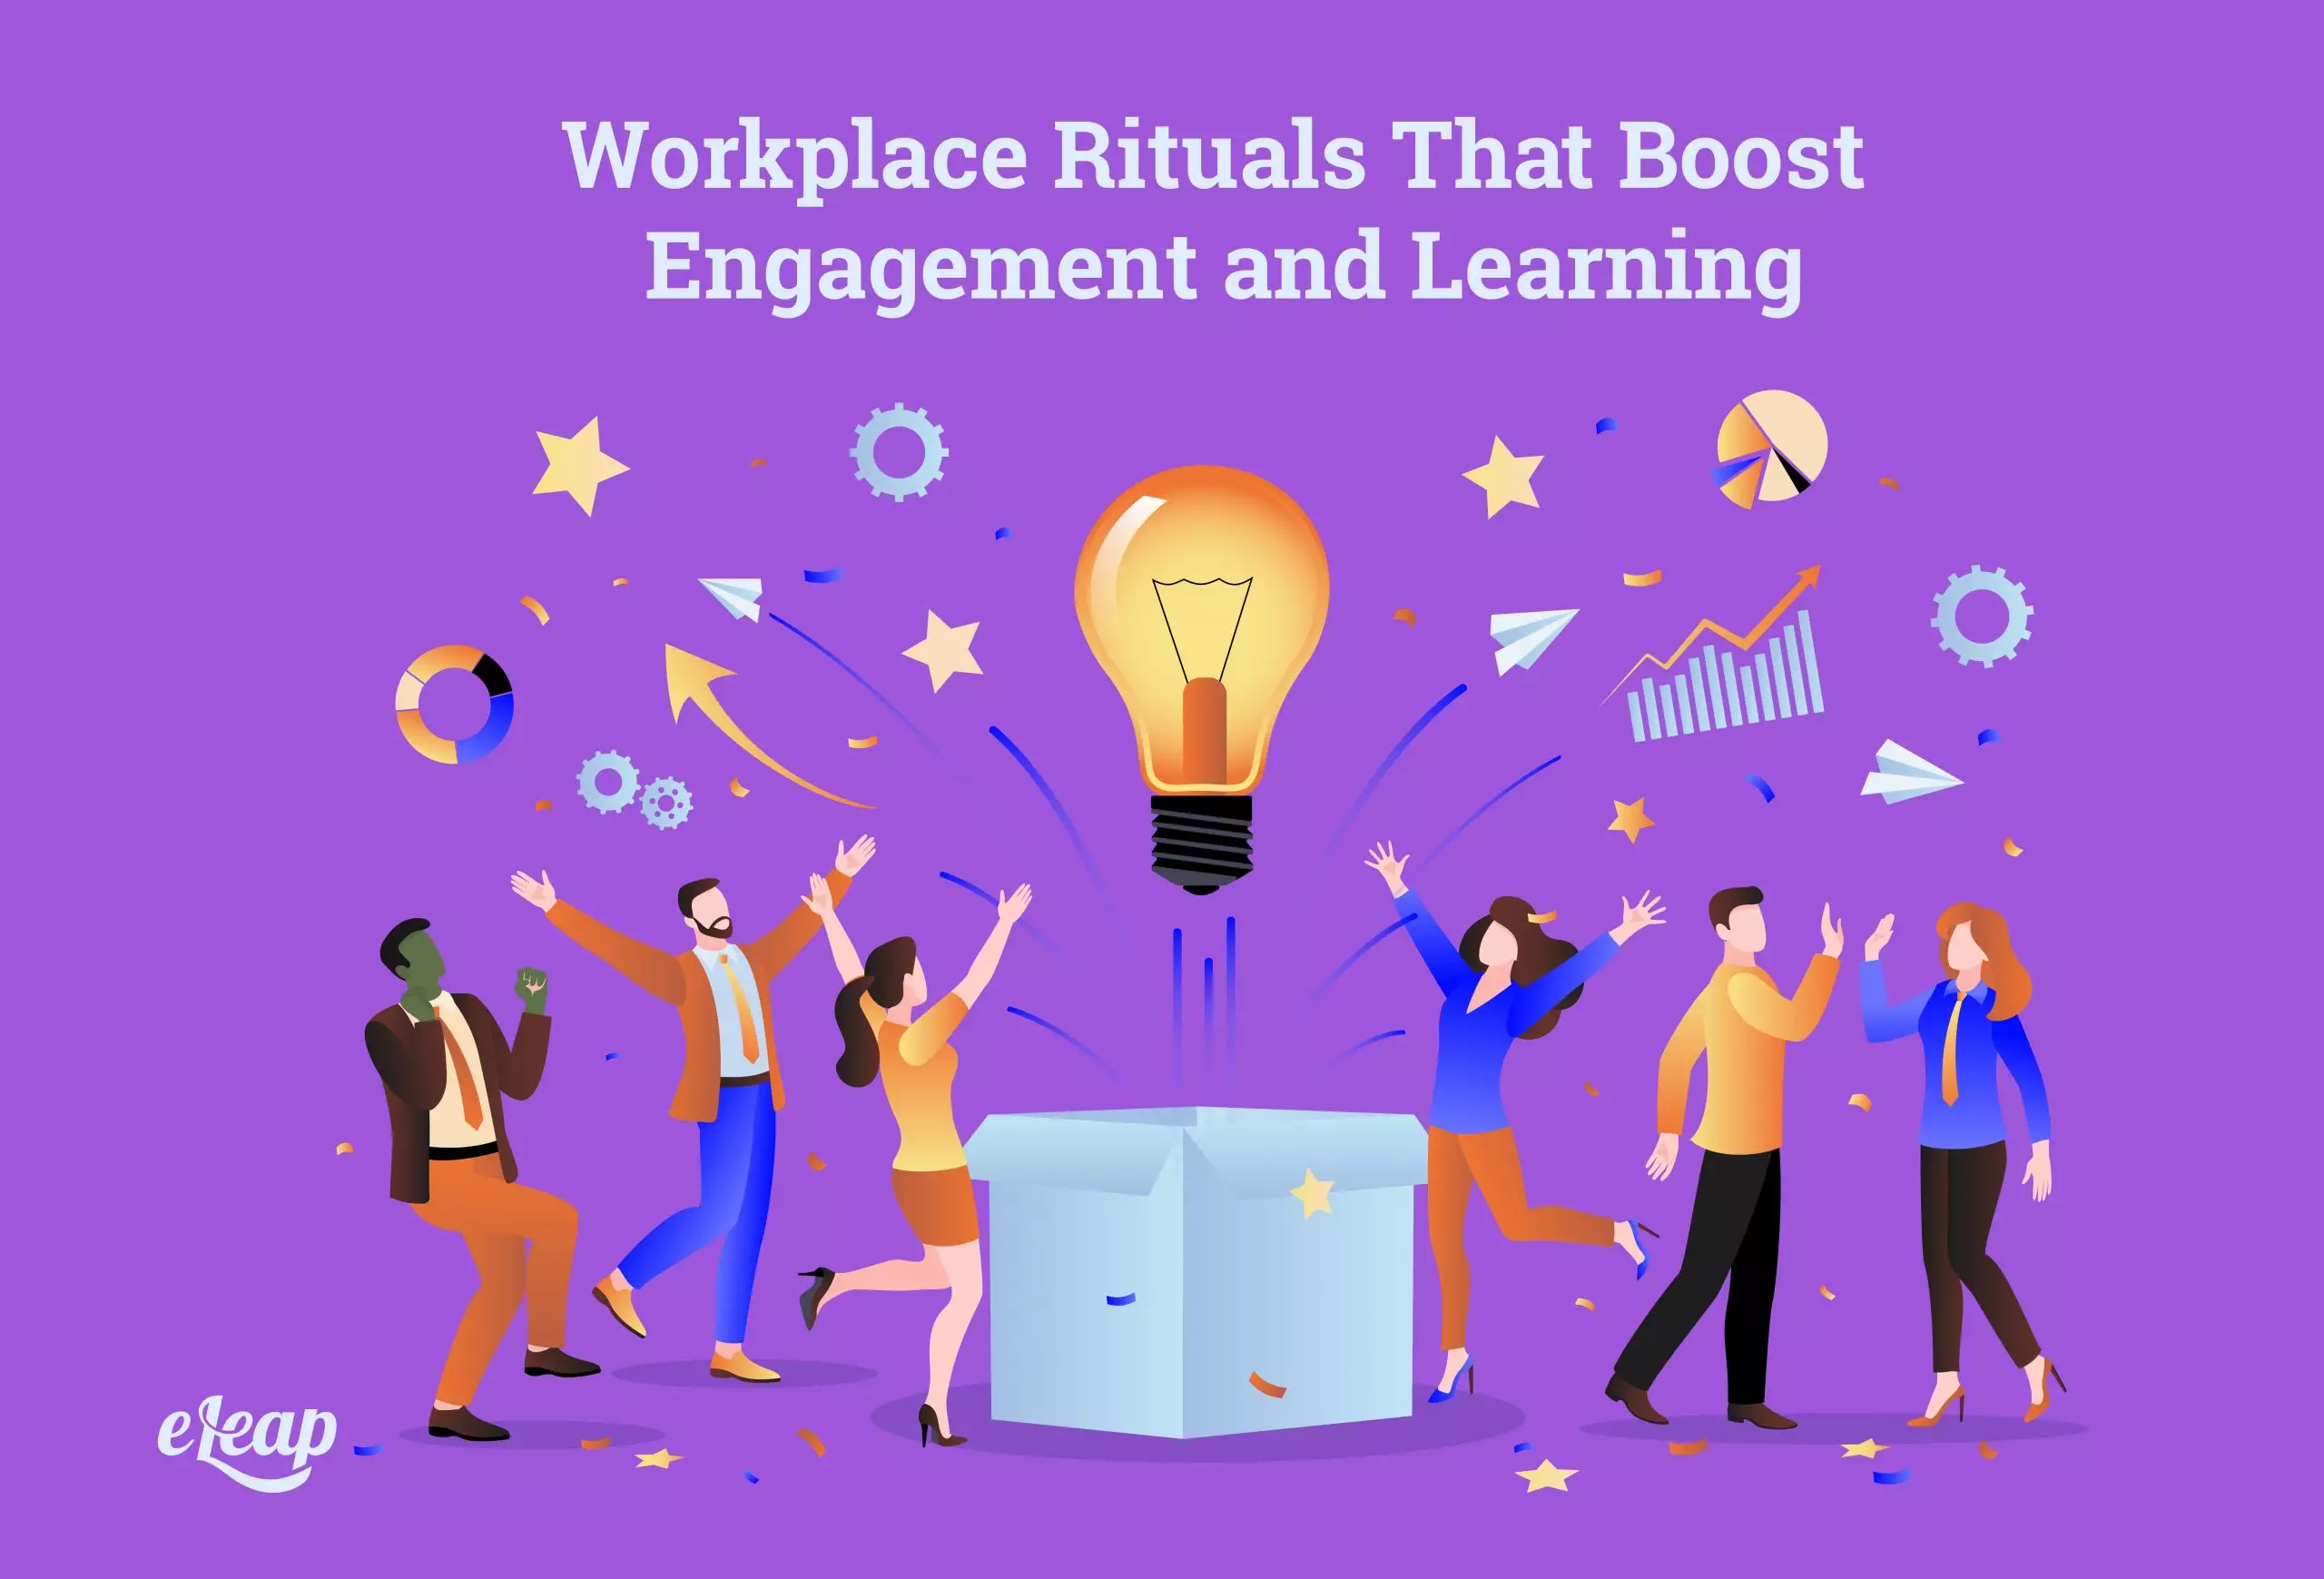 Workplace Rituals That Boost Engagement and Learning